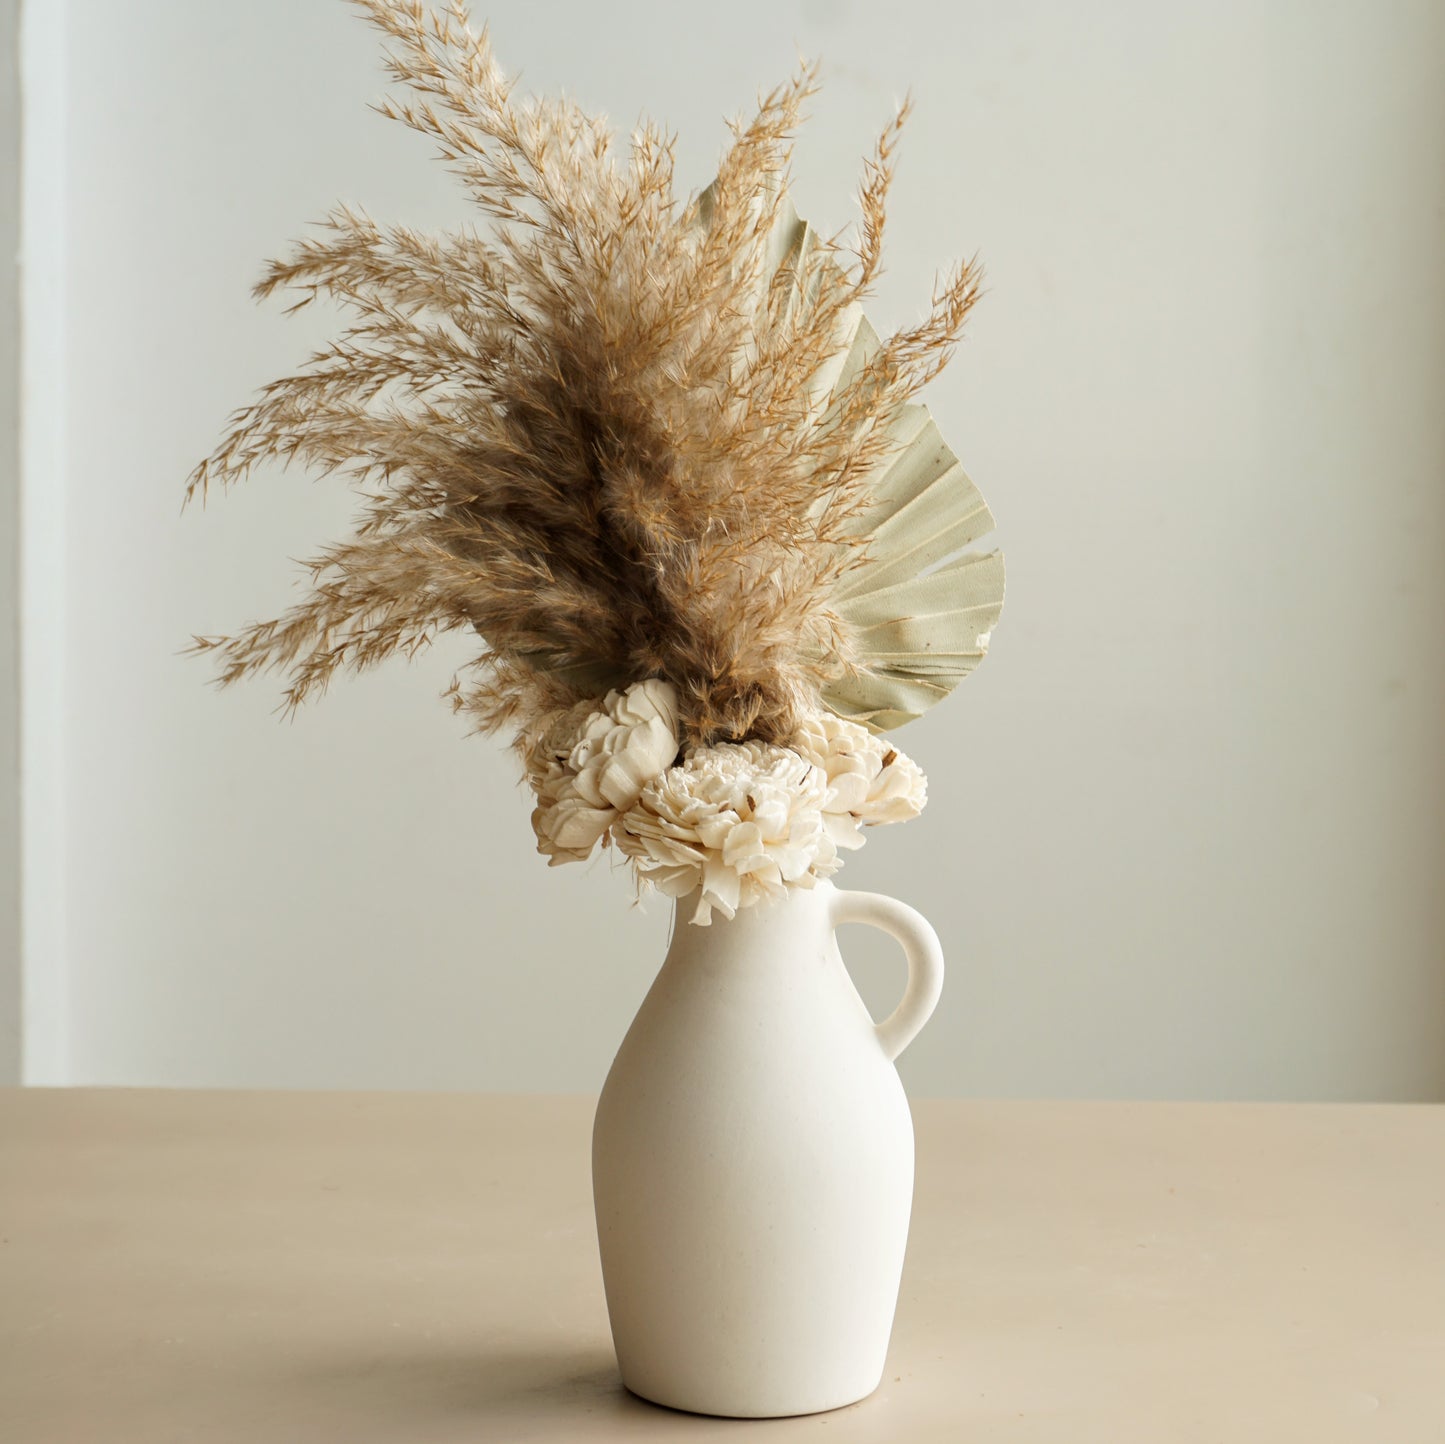 Chic Minimal Vase with Dried Leaves Combo